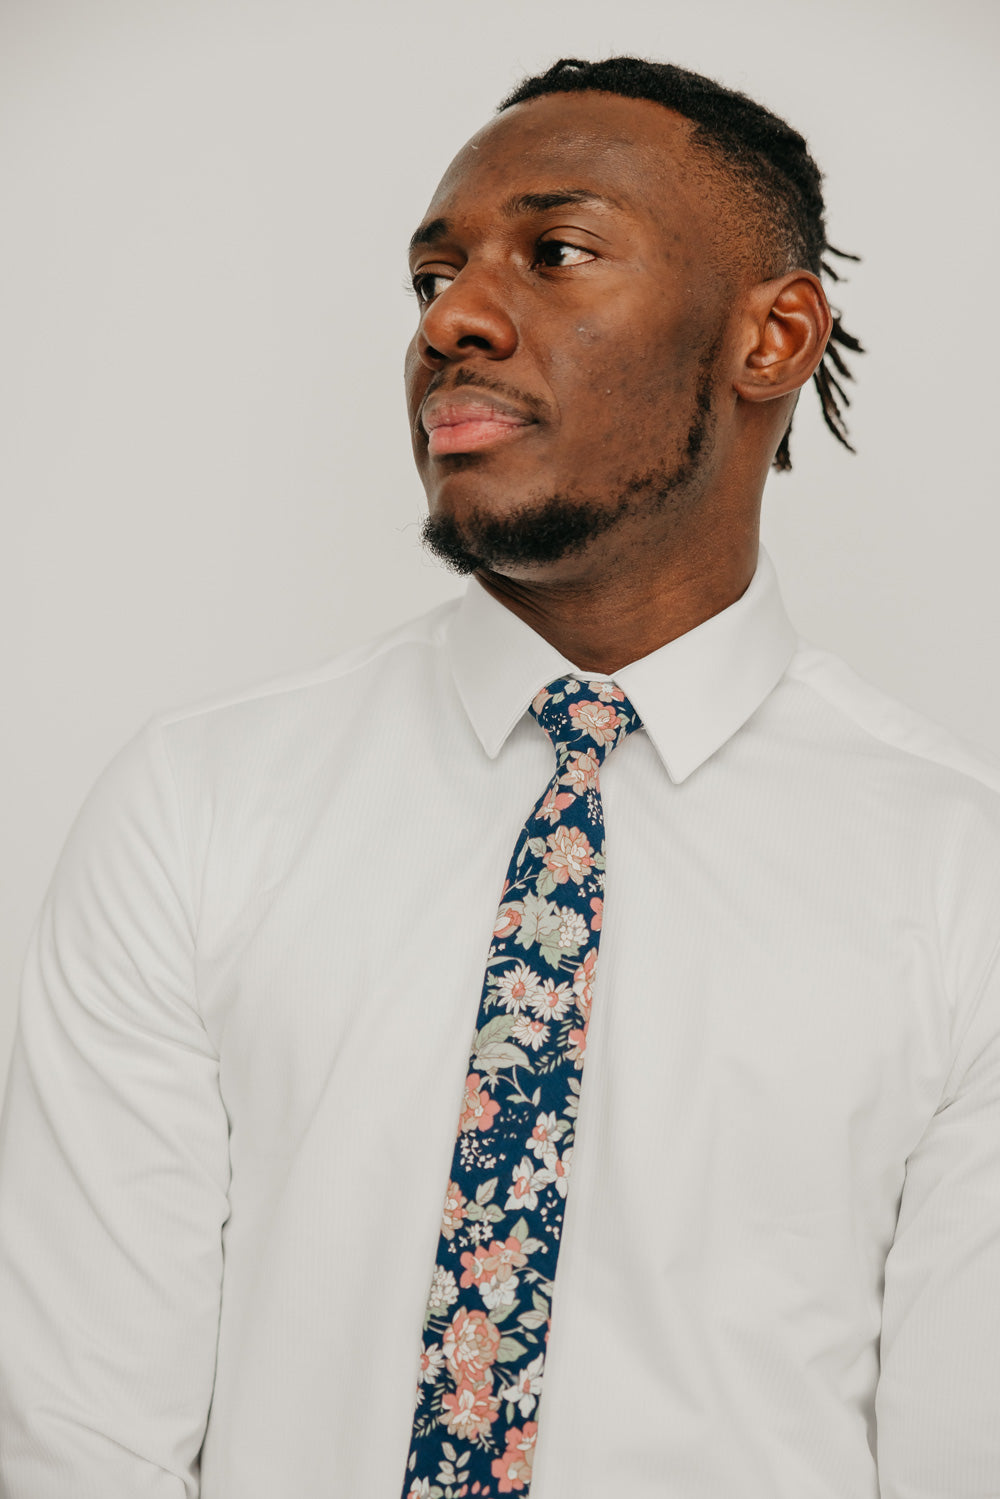 Lotus tie worn with a white shirt.